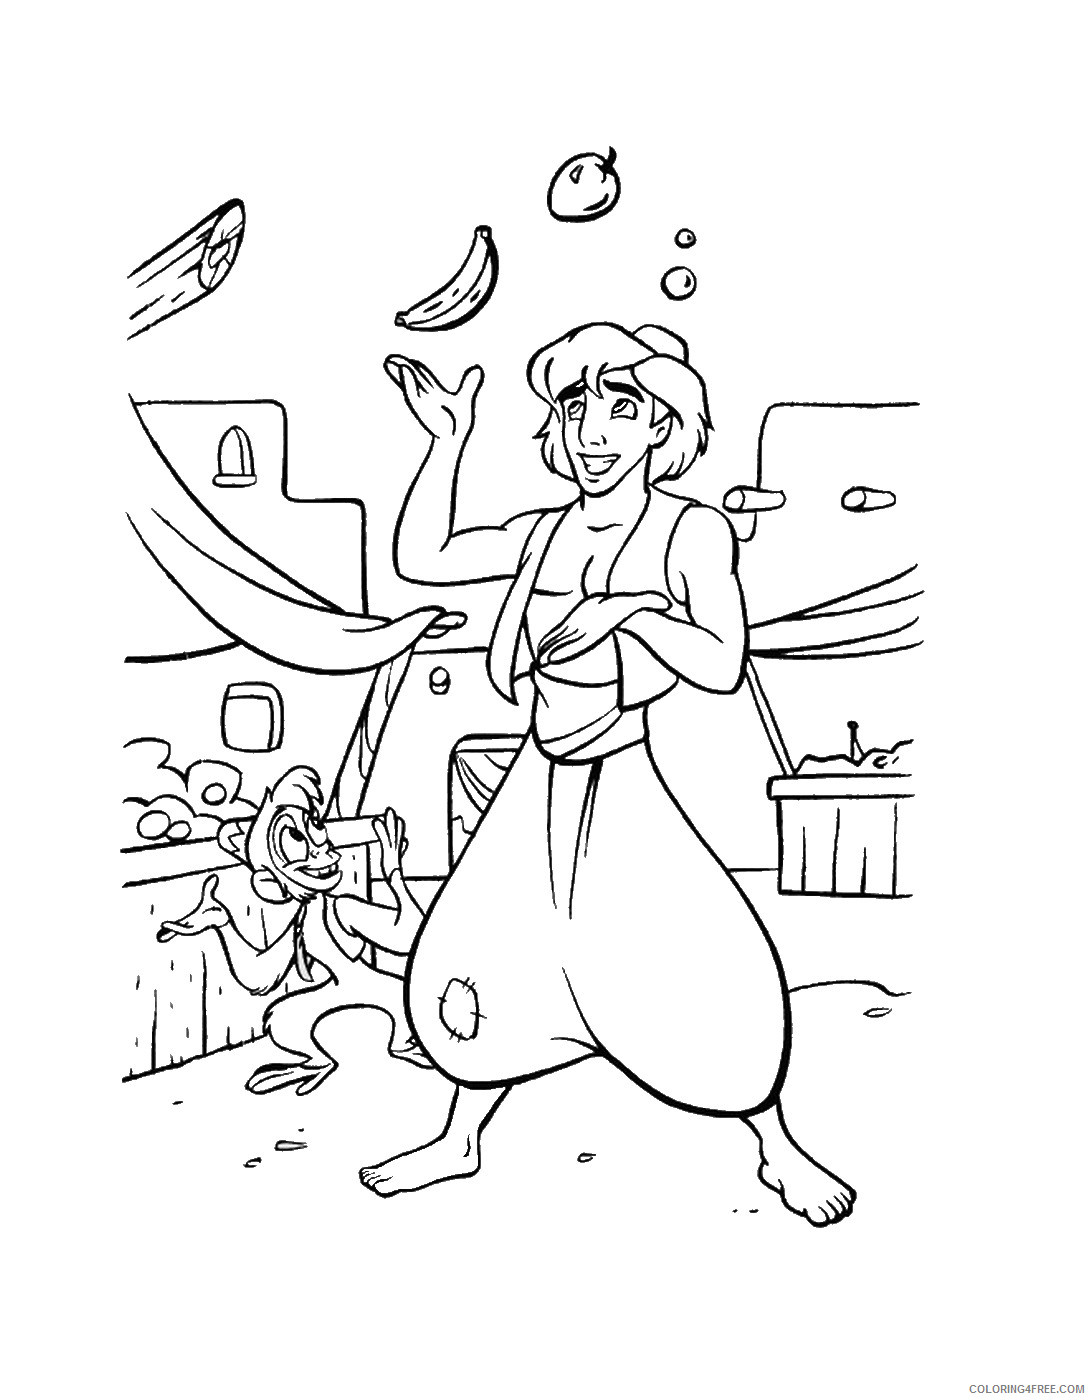 Aladdin Coloring Pages Cartoons aladdin_56 Printable 2020 0307 Coloring4free